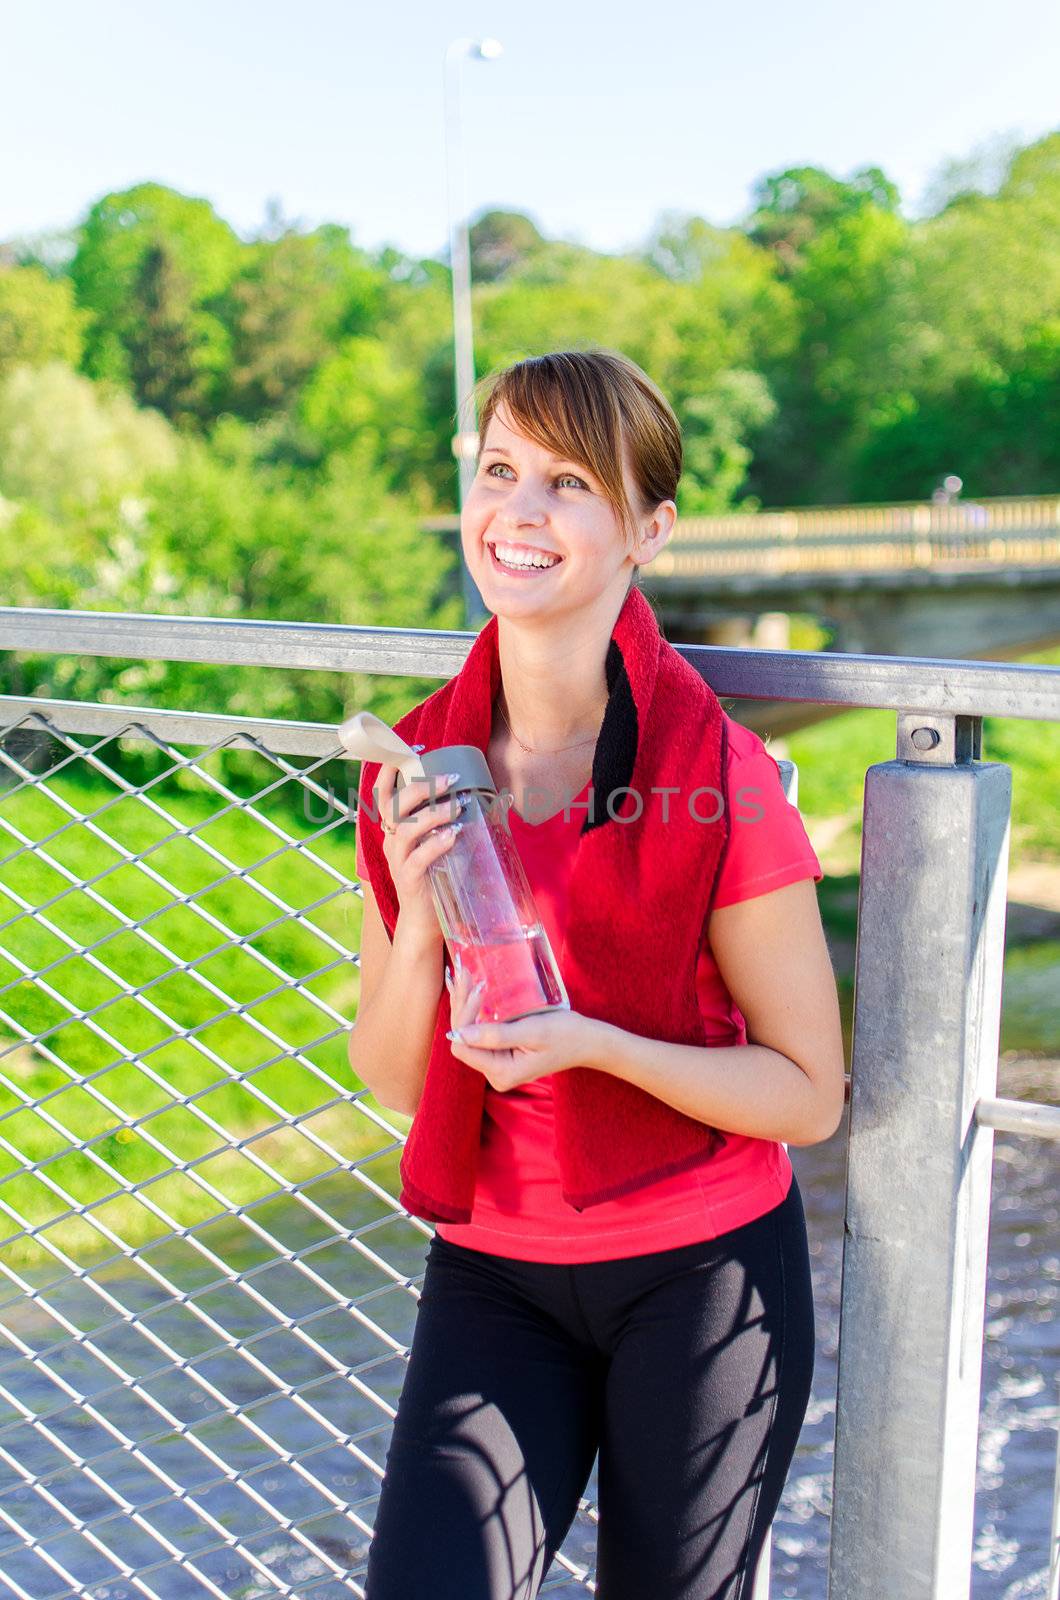 Smiling female runner with bottle of water